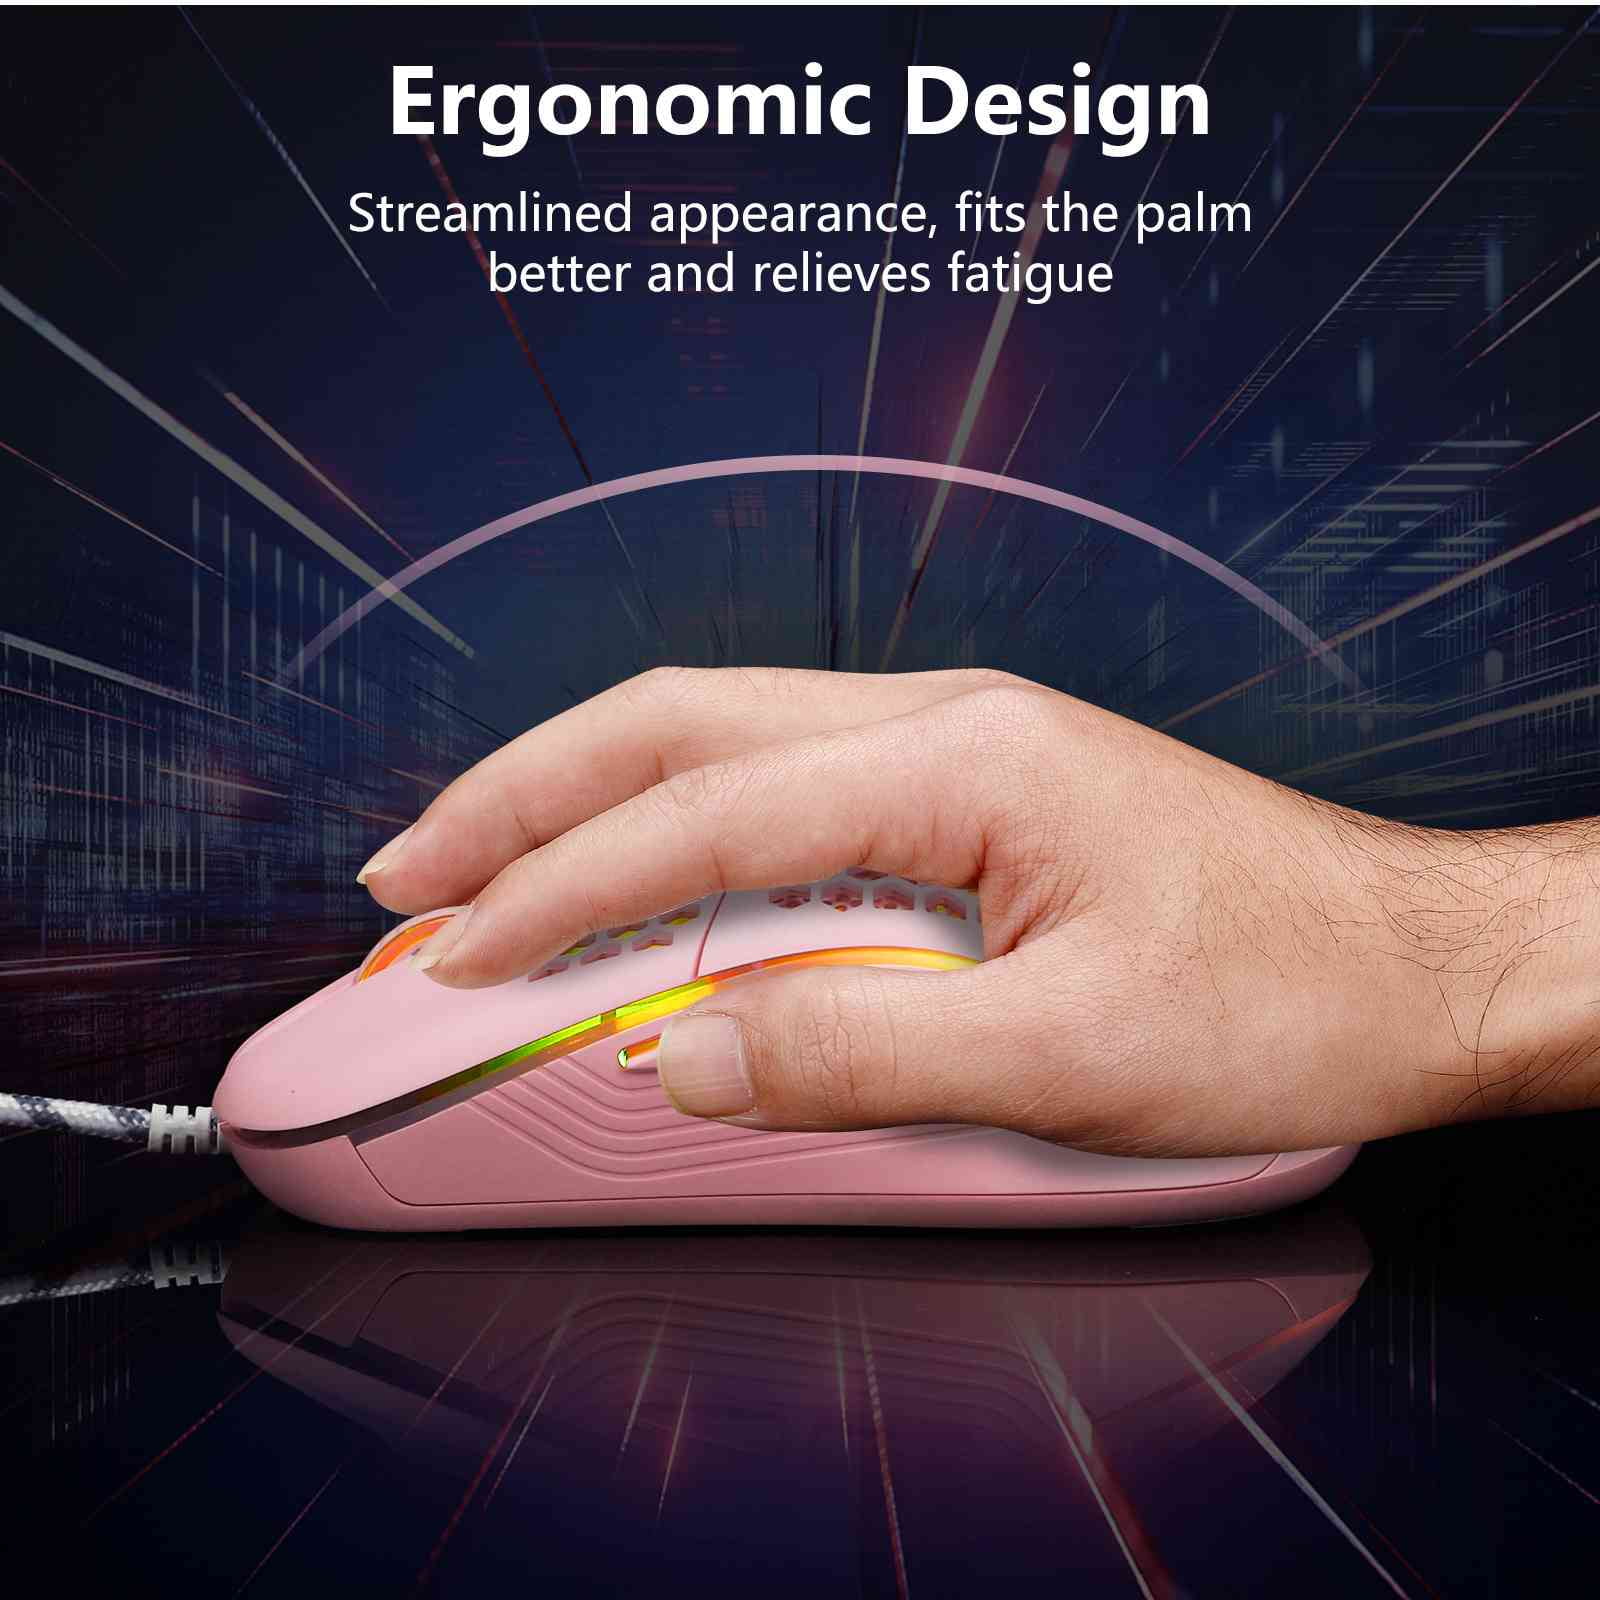 Pink Honeycomb USB Wired RGB Gaming Ergonomic Adjustable DPI PC Computer  Mouse